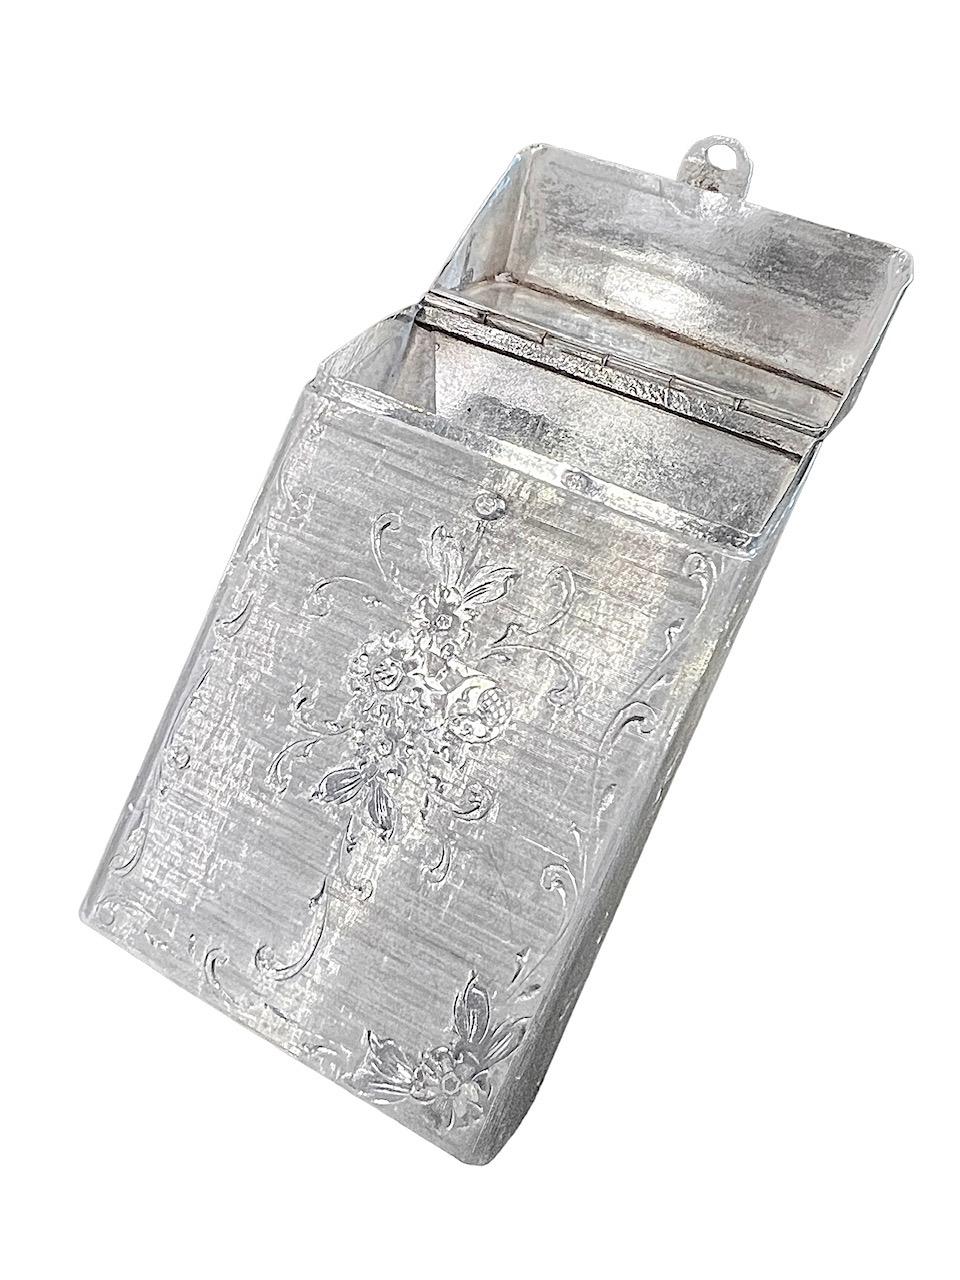 Italian Set of two Sterling Silver Cigarette Cases 19th and 20 Century, Mario Buccellat For Sale